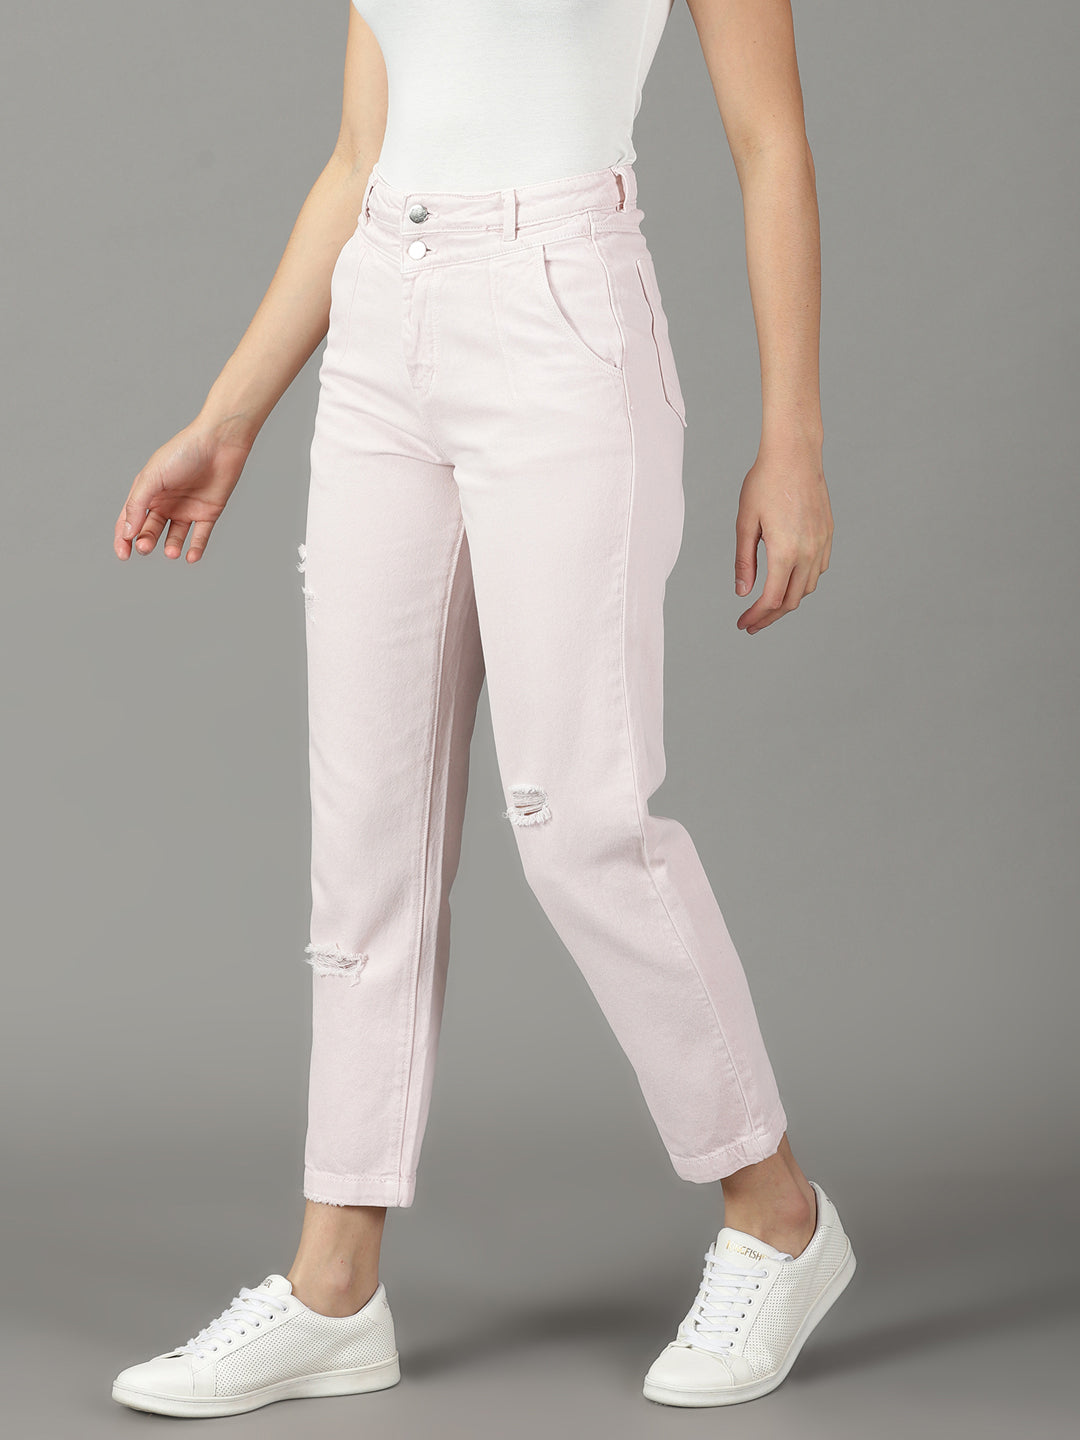 Women's Peach Solid Relaxed Fit Denim Jeans